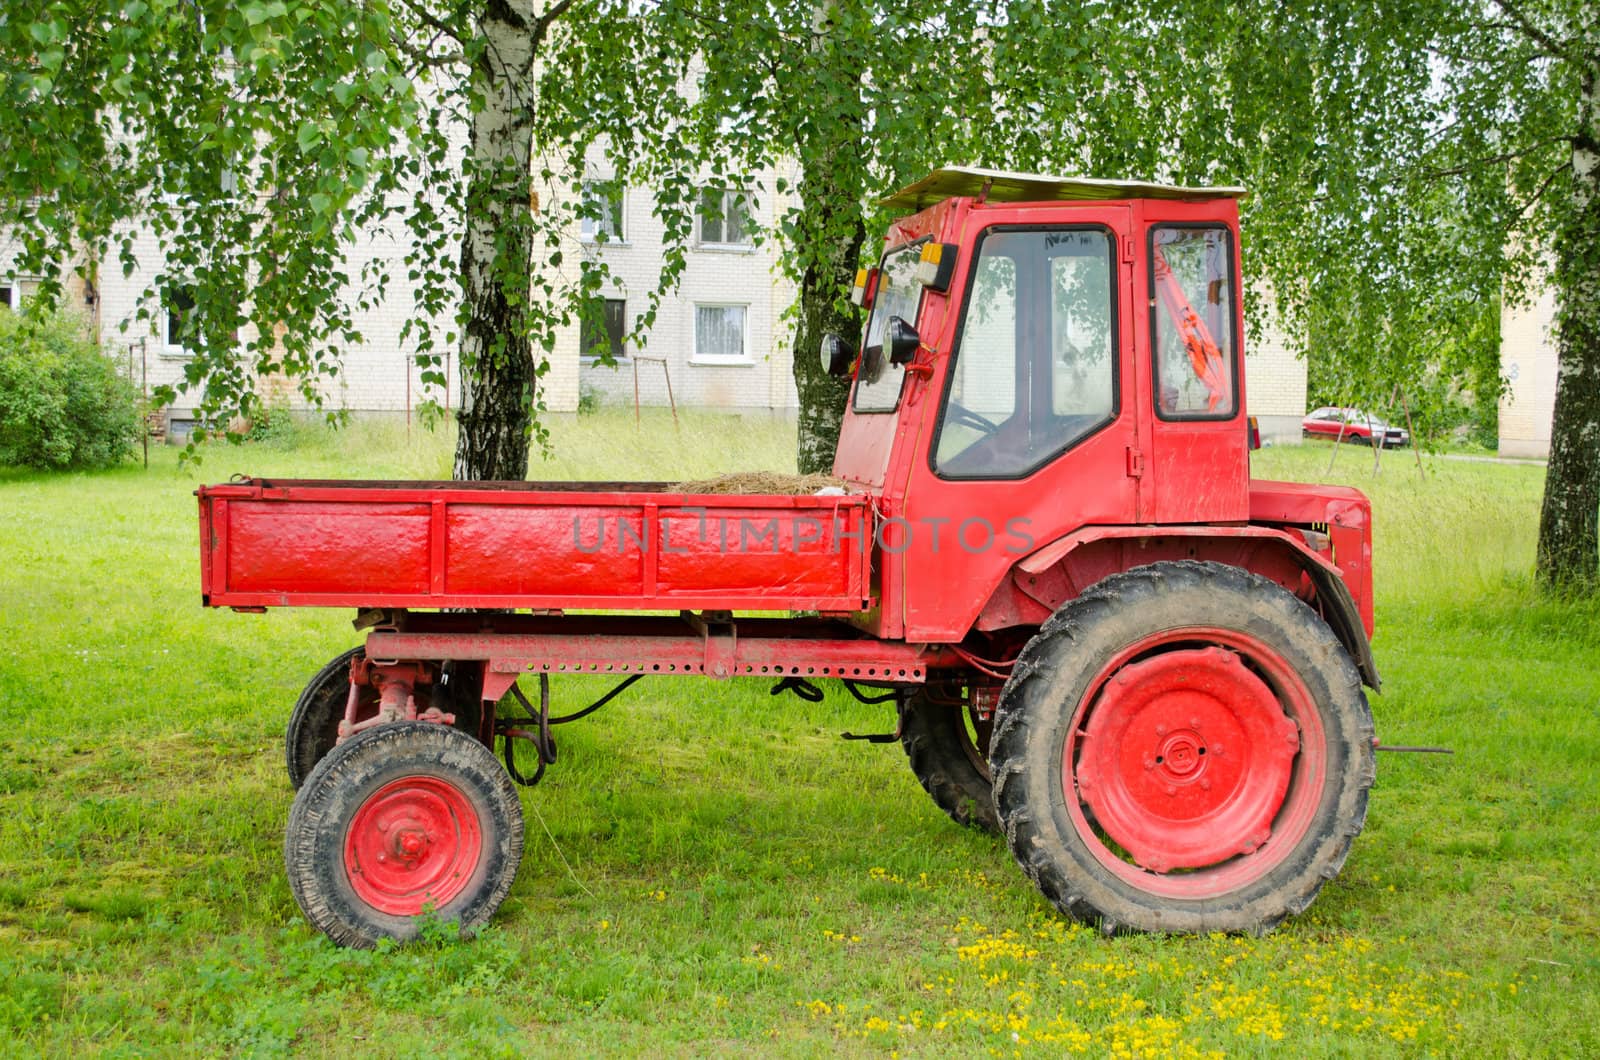 Retro red agricultural tractor with trailer near birch tree in small town.